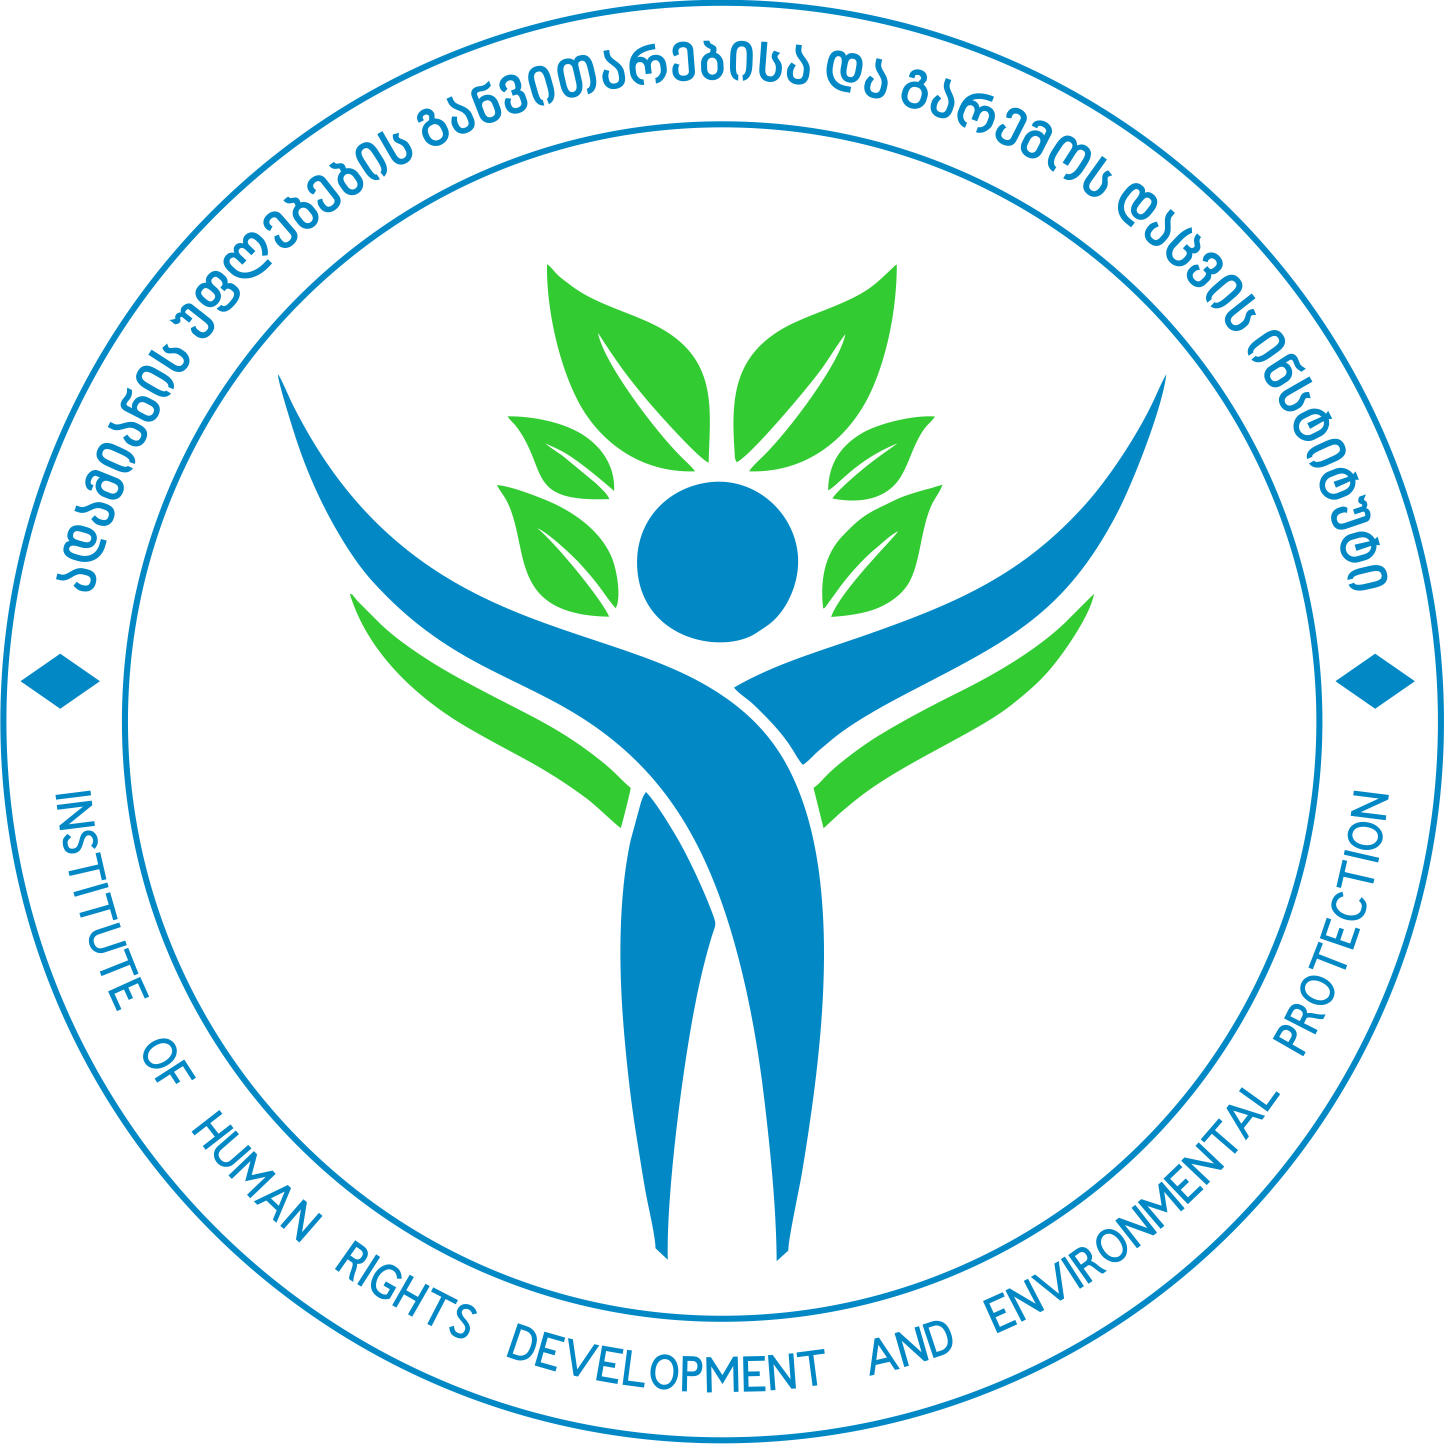 Institute of Human Rights Development and Environmental Protection